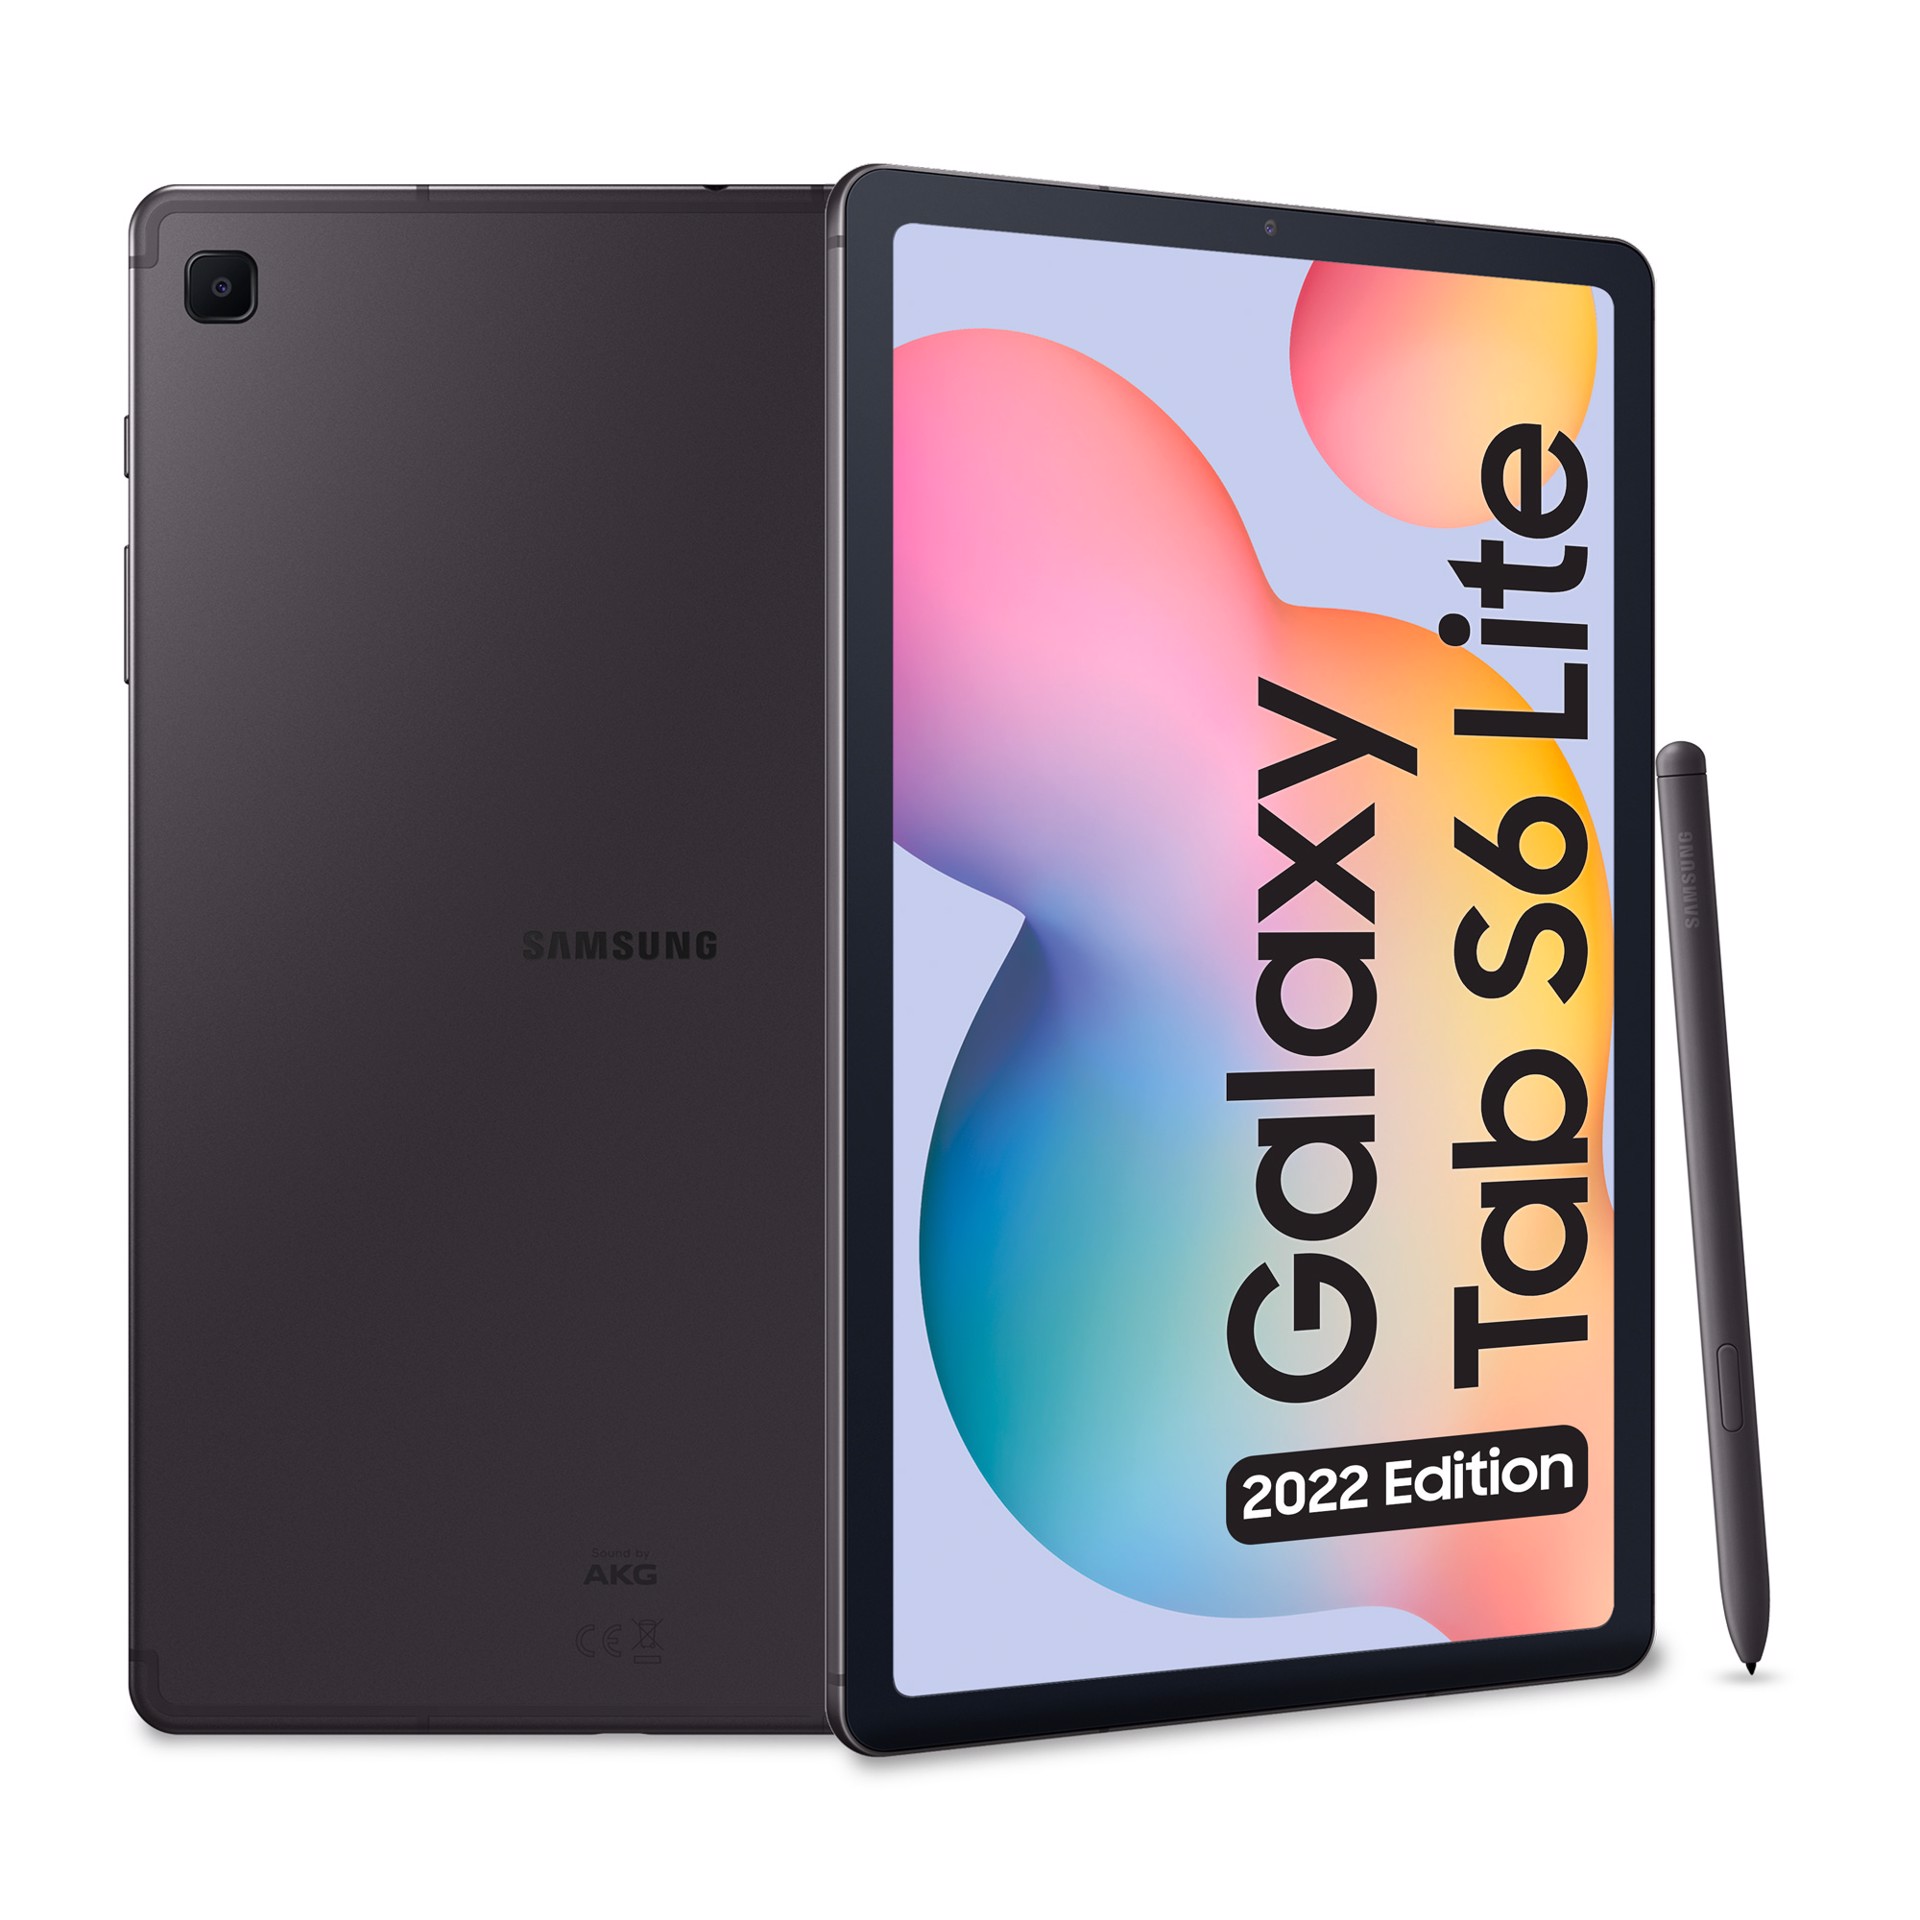 SAMSUNG Galaxy Tab S6 Lite (2022) Tablet Android 10.4 Pollici Wi-Fi RAM 4  GB, 64 GB espandibili Tablet Android 12 Oxford Gray, Tablet in Offerta su  Stay On